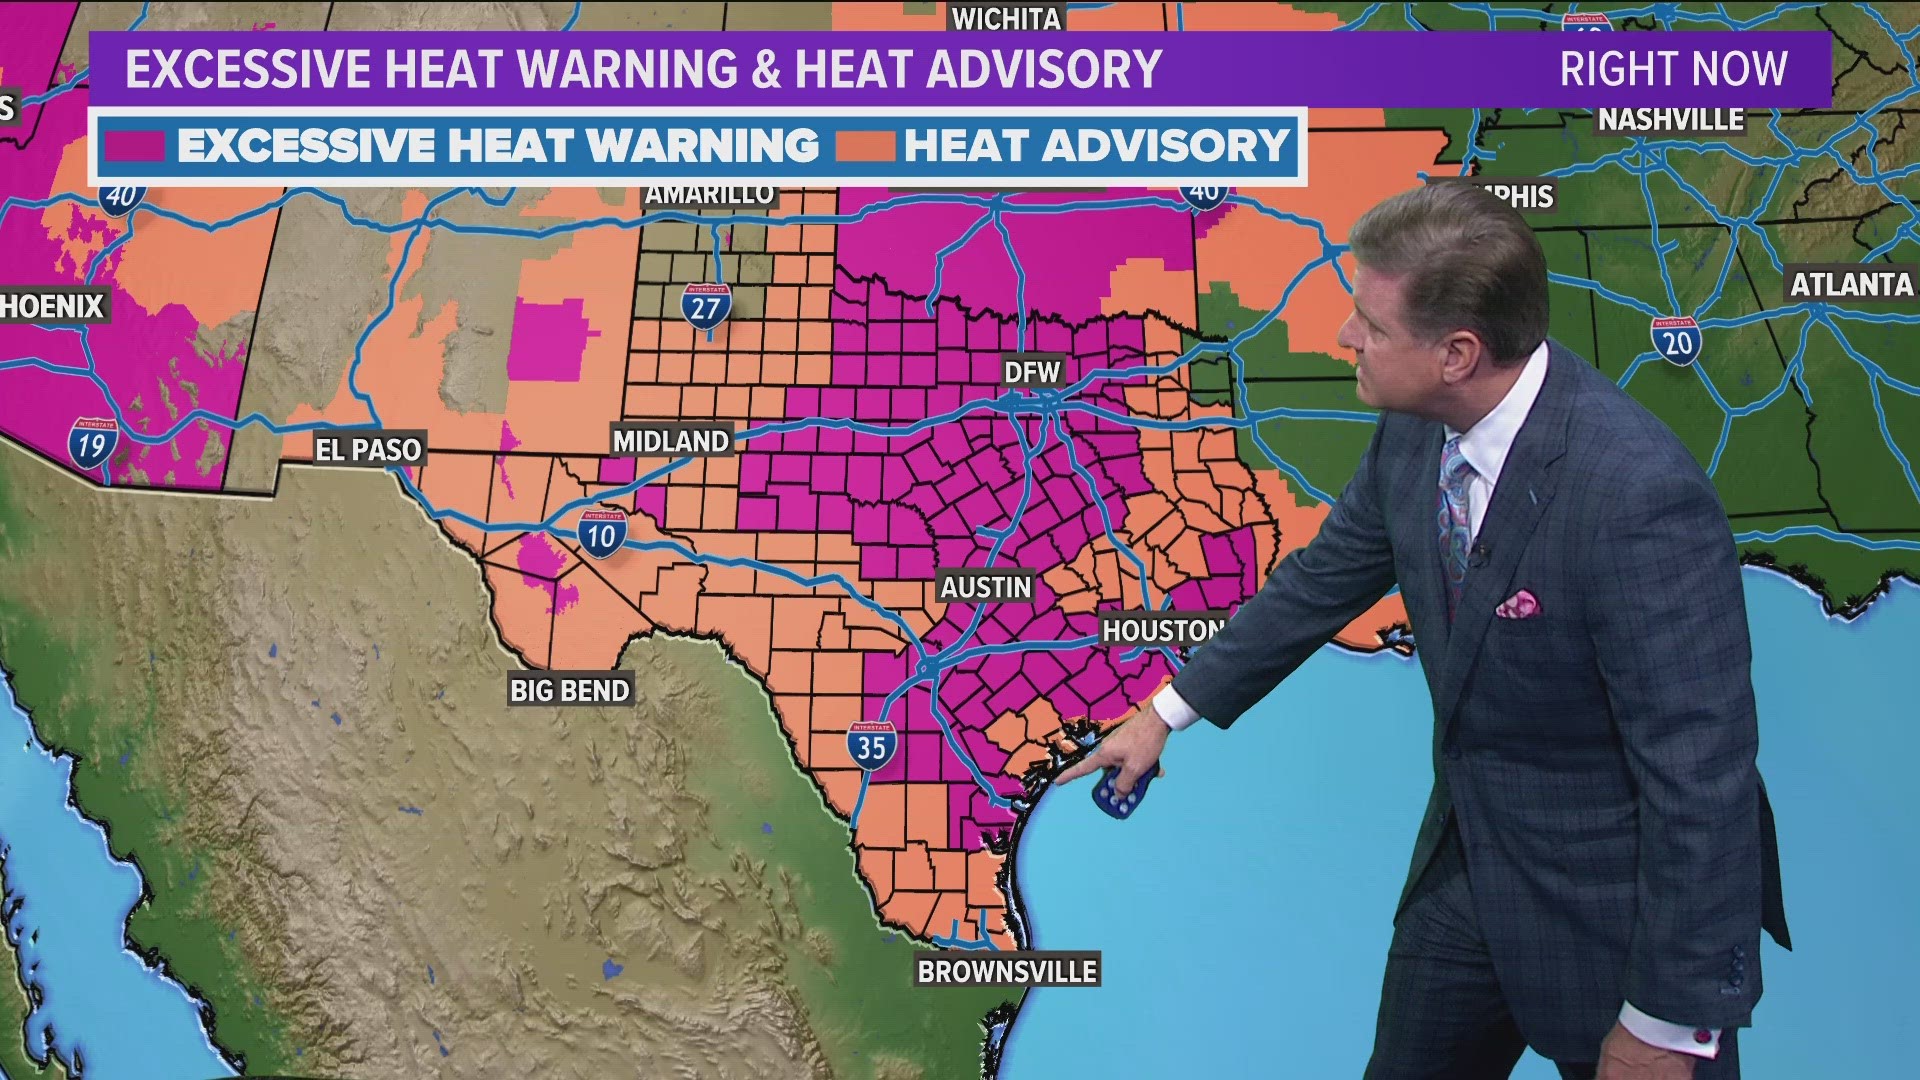 An excessive heat warning is in effect for North Texas through Thursday night -- but it could be extended.